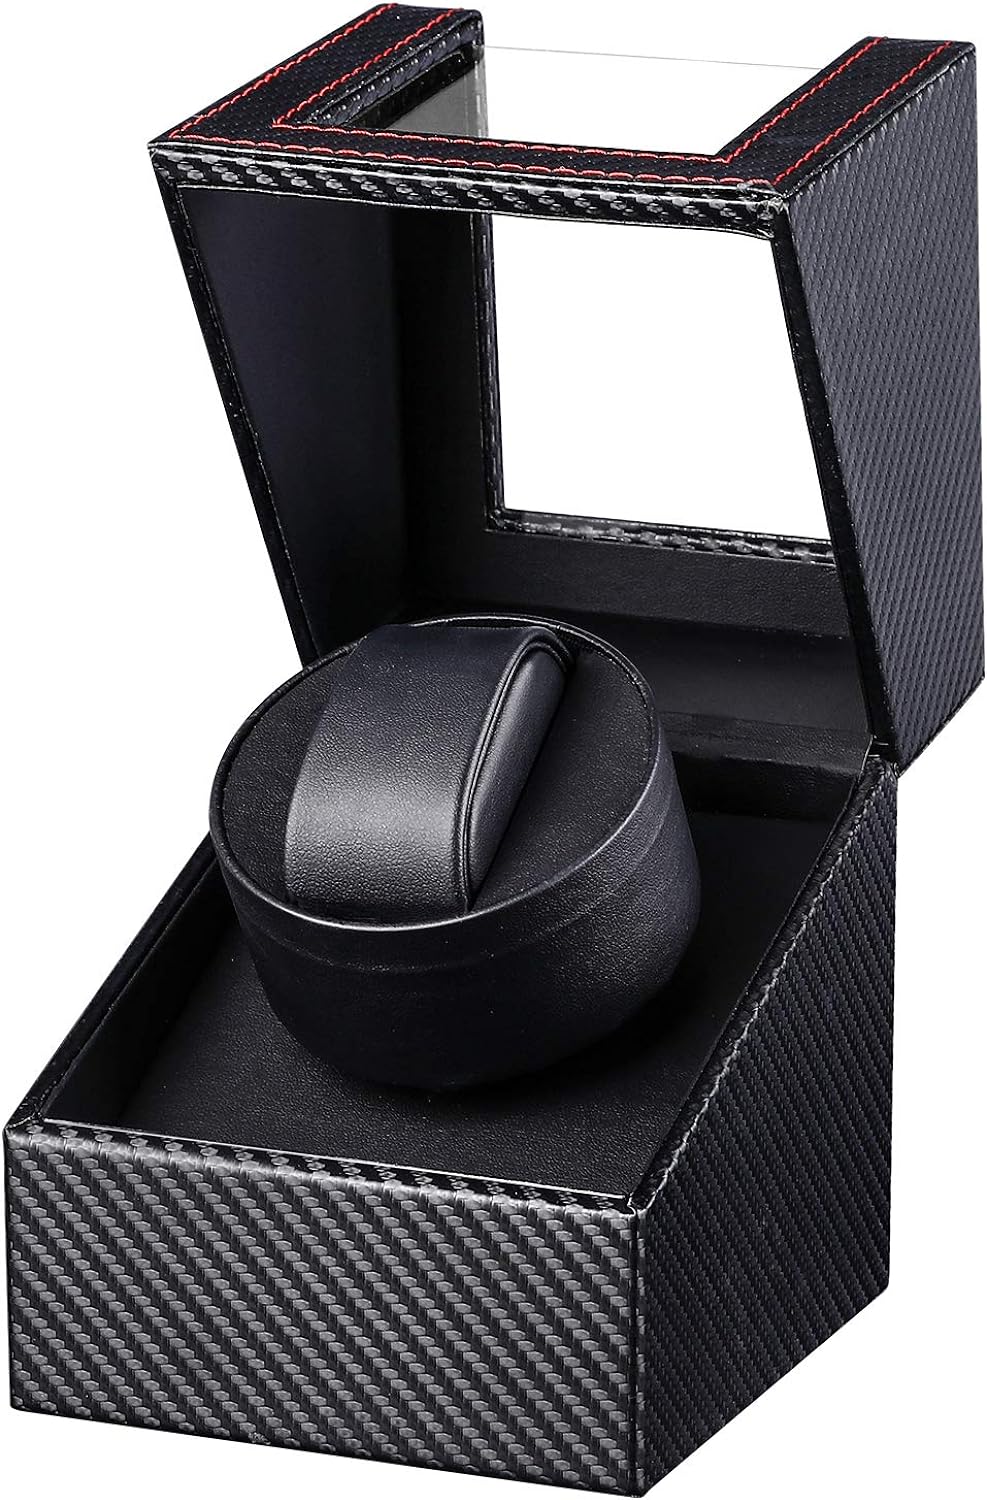 Automatic Watch Winder Box, Gifort Single Watch Winder PU Leather Watch Case with Quiet Motor, Battery Powered or AC Adapter (UK Plug)